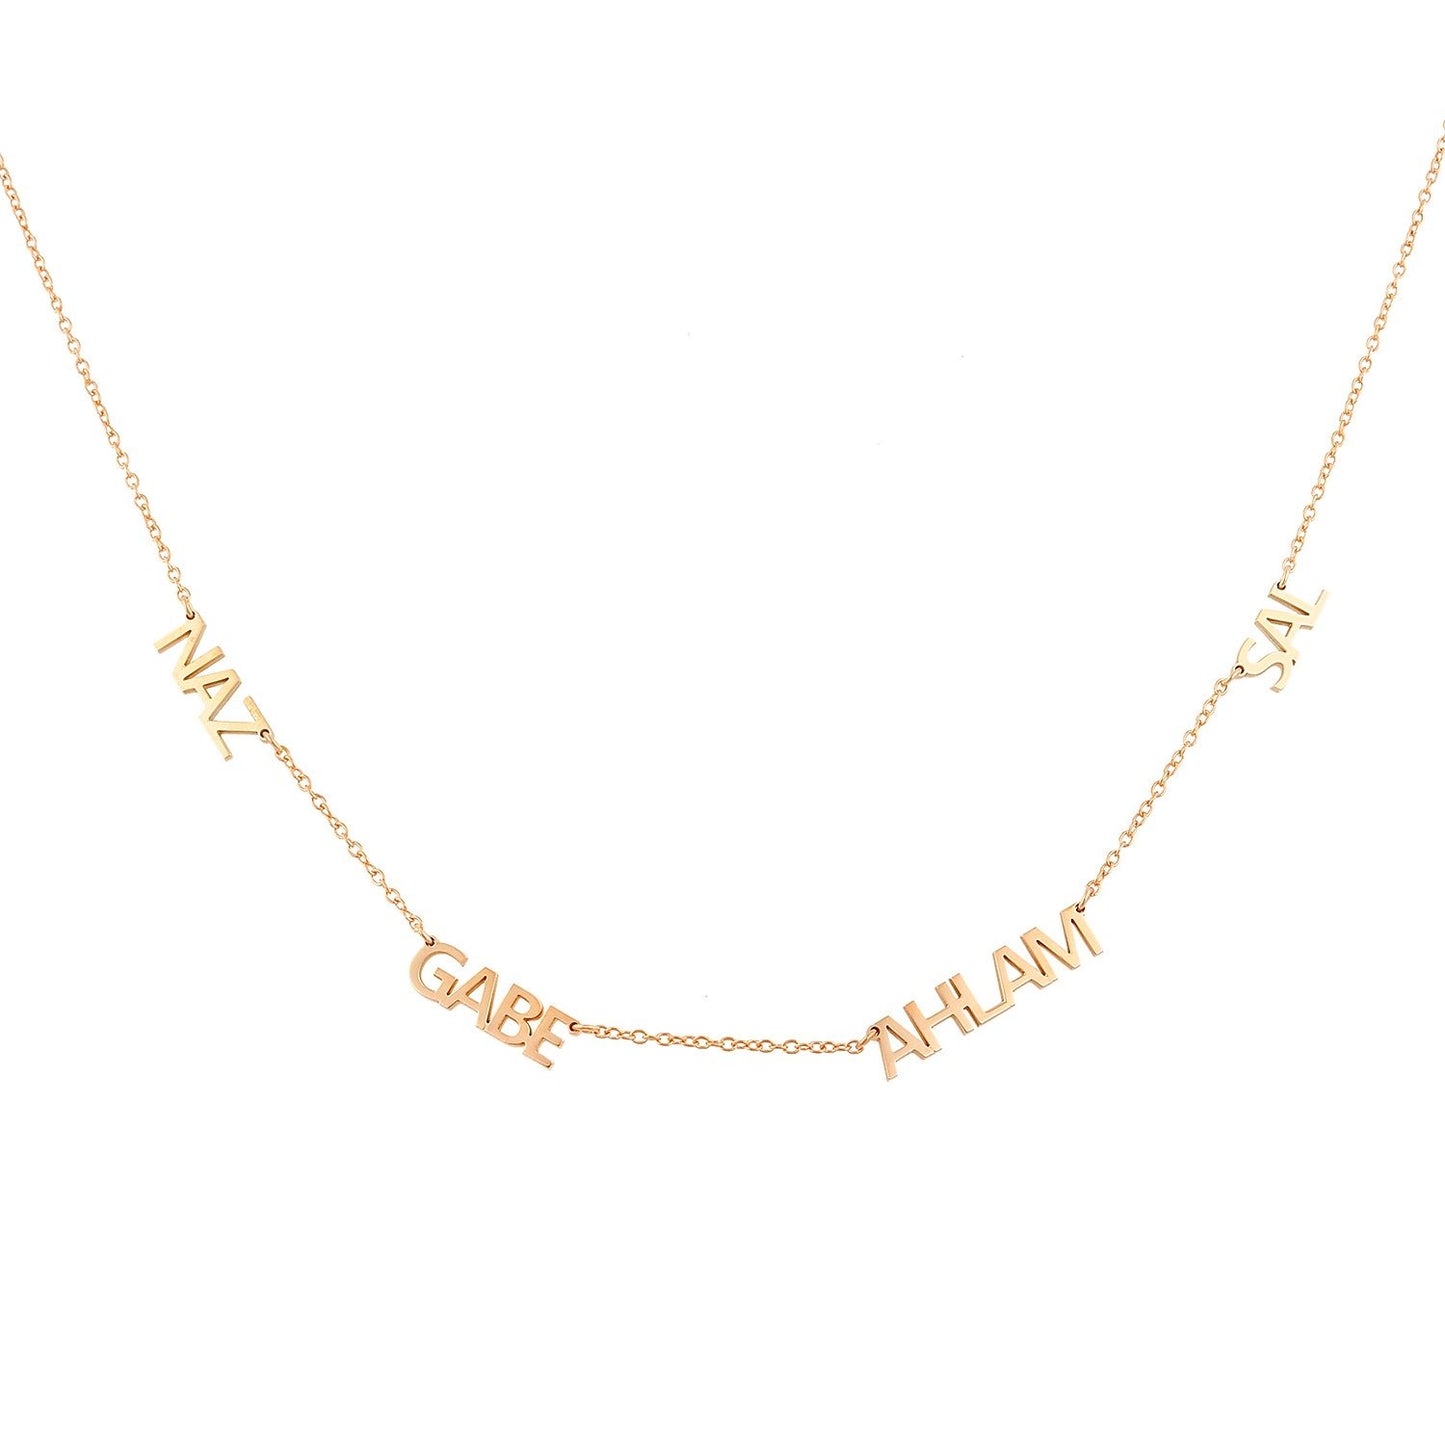 TSK 14K My Mantra/Name Necklace JEWELRY The Sis Kiss Classic Mantra Style Rose Gold Four